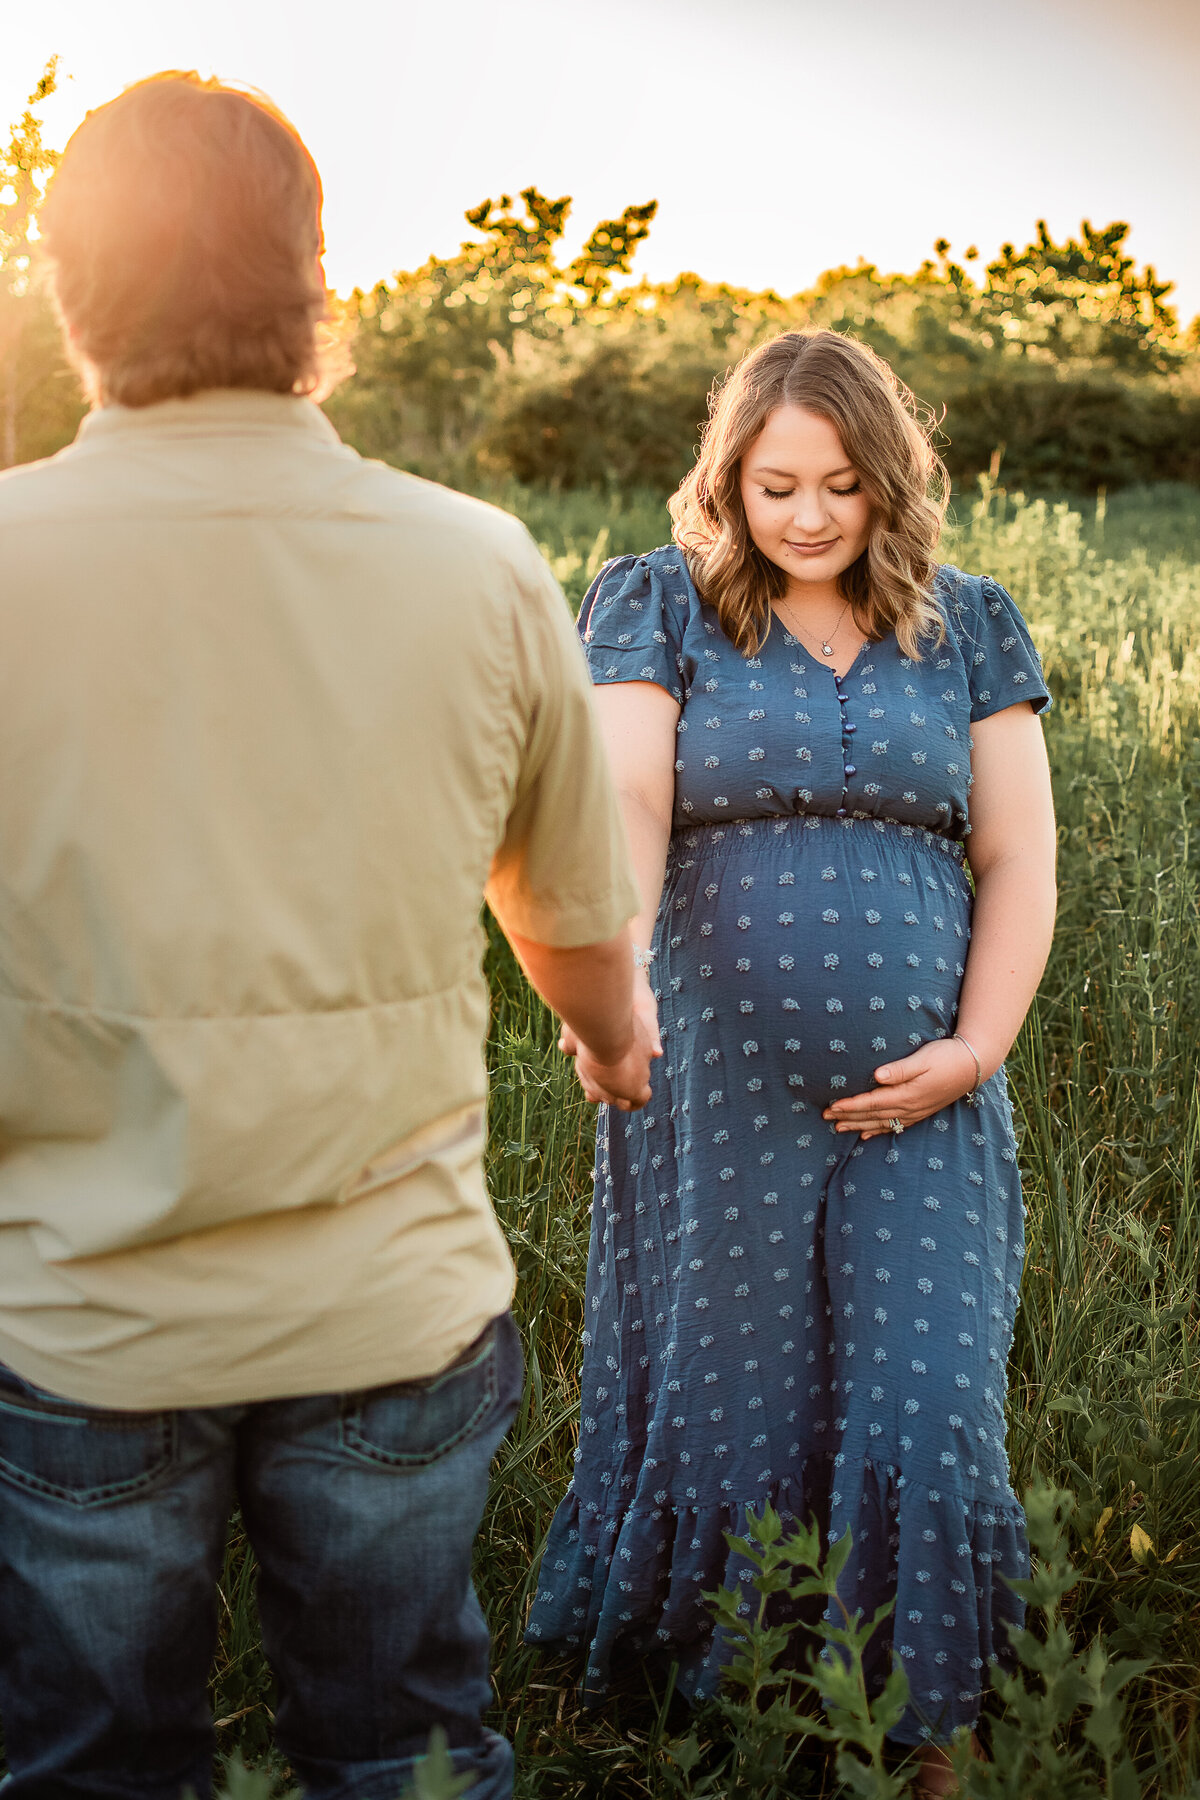 A mom to be looks down at her belly while she holds her husband's hand.